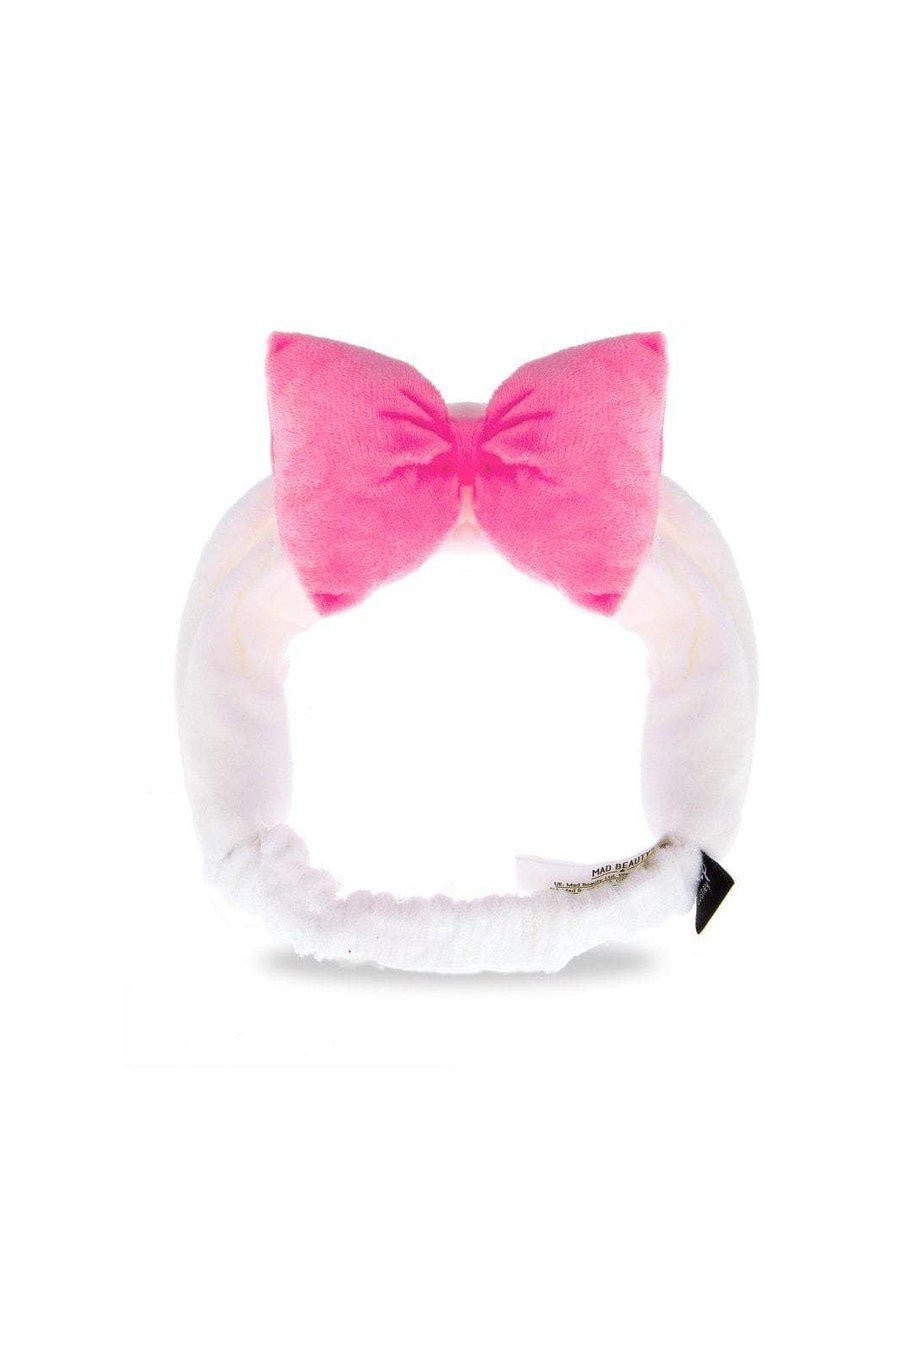 Buy Disney Mickey &amp; Friends Makeup Headbands at Spoiled Brat  Online - UK online Fashion &amp; lifestyle boutique